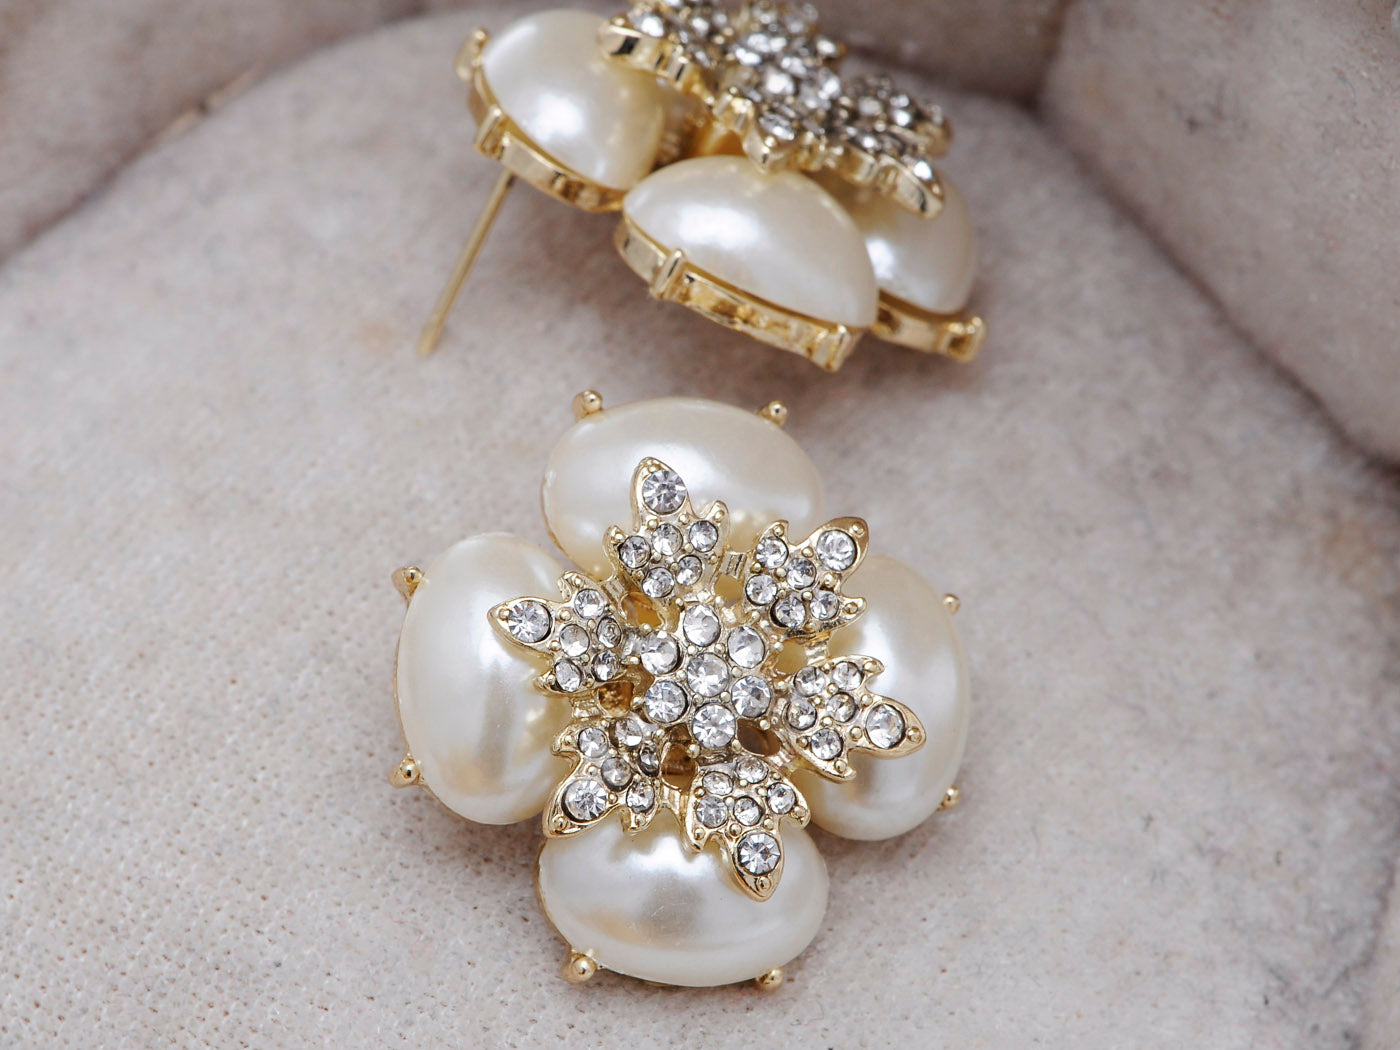 Royal Pearl White Accented Earrings